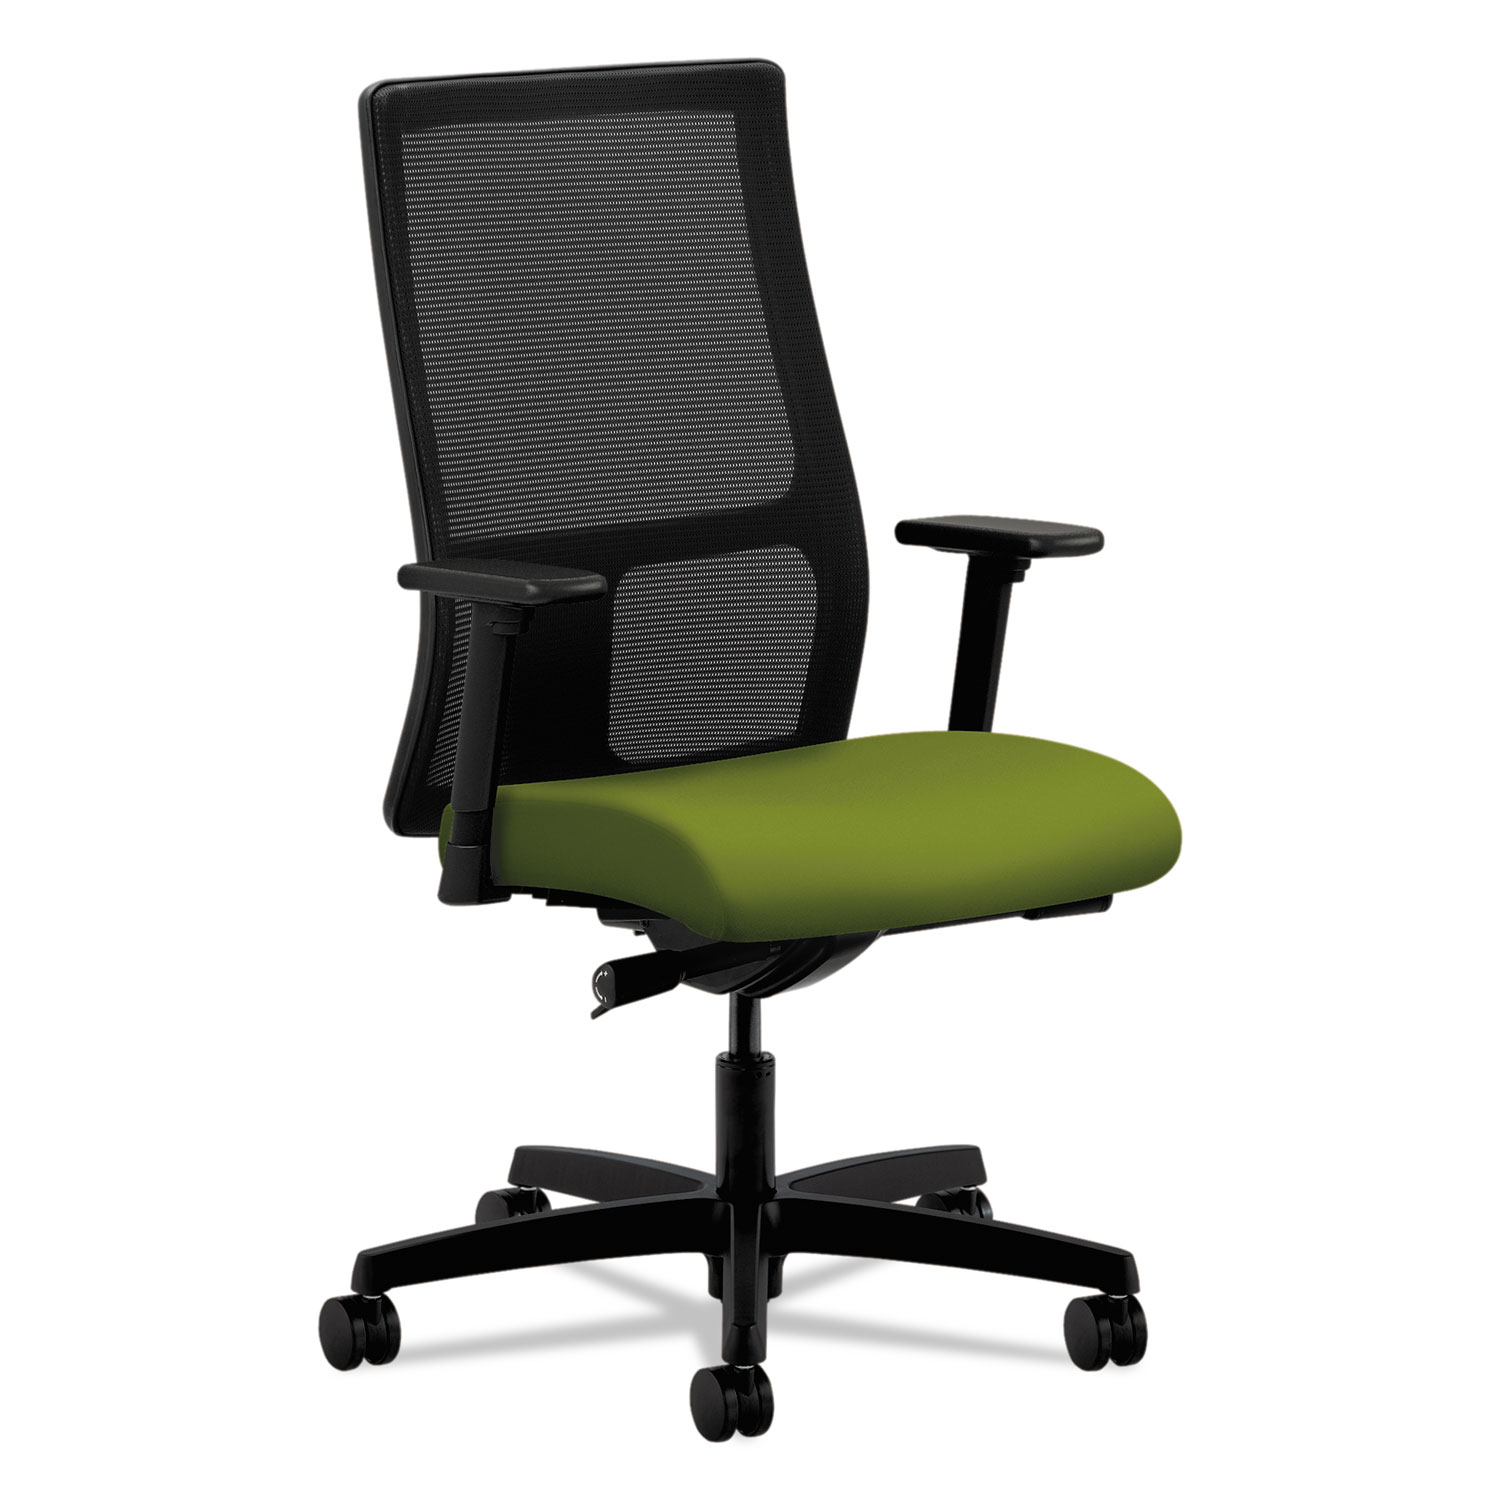  HON HIWM2.A.H.M.CU84.T.SB Ignition Series Mesh Mid-Back Work Chair, Supports up to 300 lbs., Pear Seat/Black Back, Black Base (HONIW103CU84) 